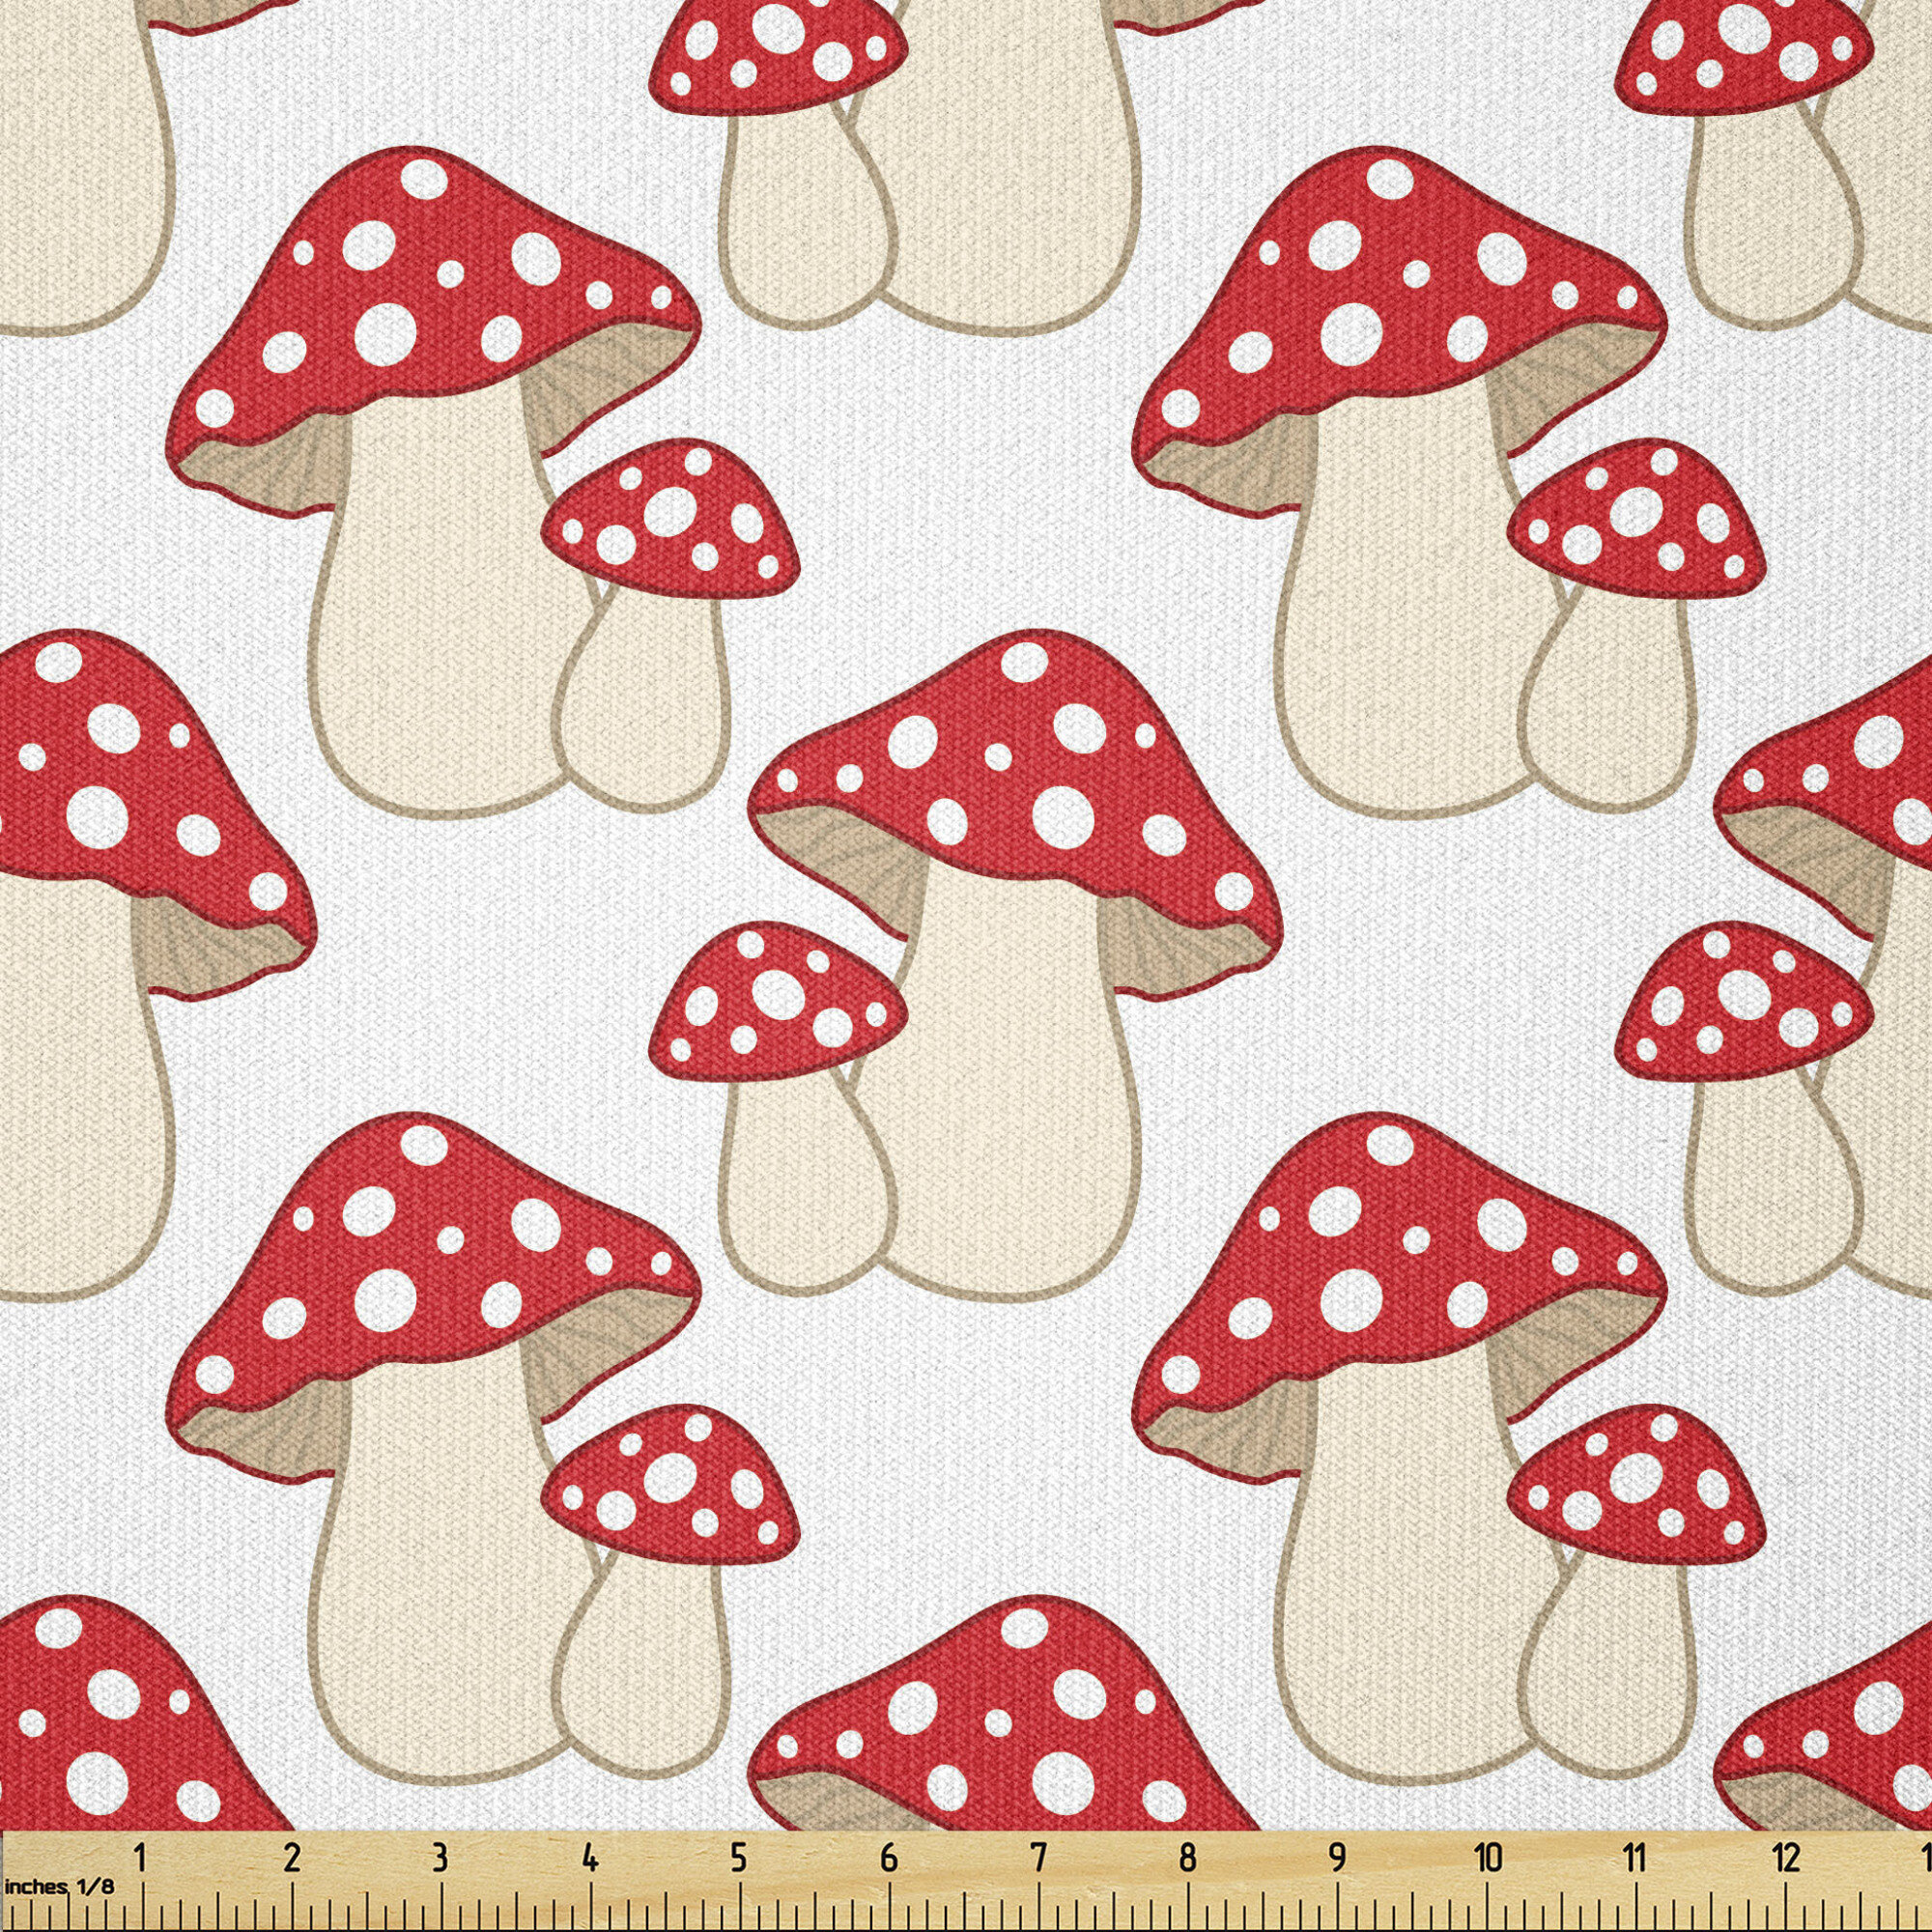 East Urban Home Mushroom Fabric By The Yard, Cartoon Style Amanita  Mushrooms Dotted Forest Plants Summer Nature Design,Square - Wayfair Canada